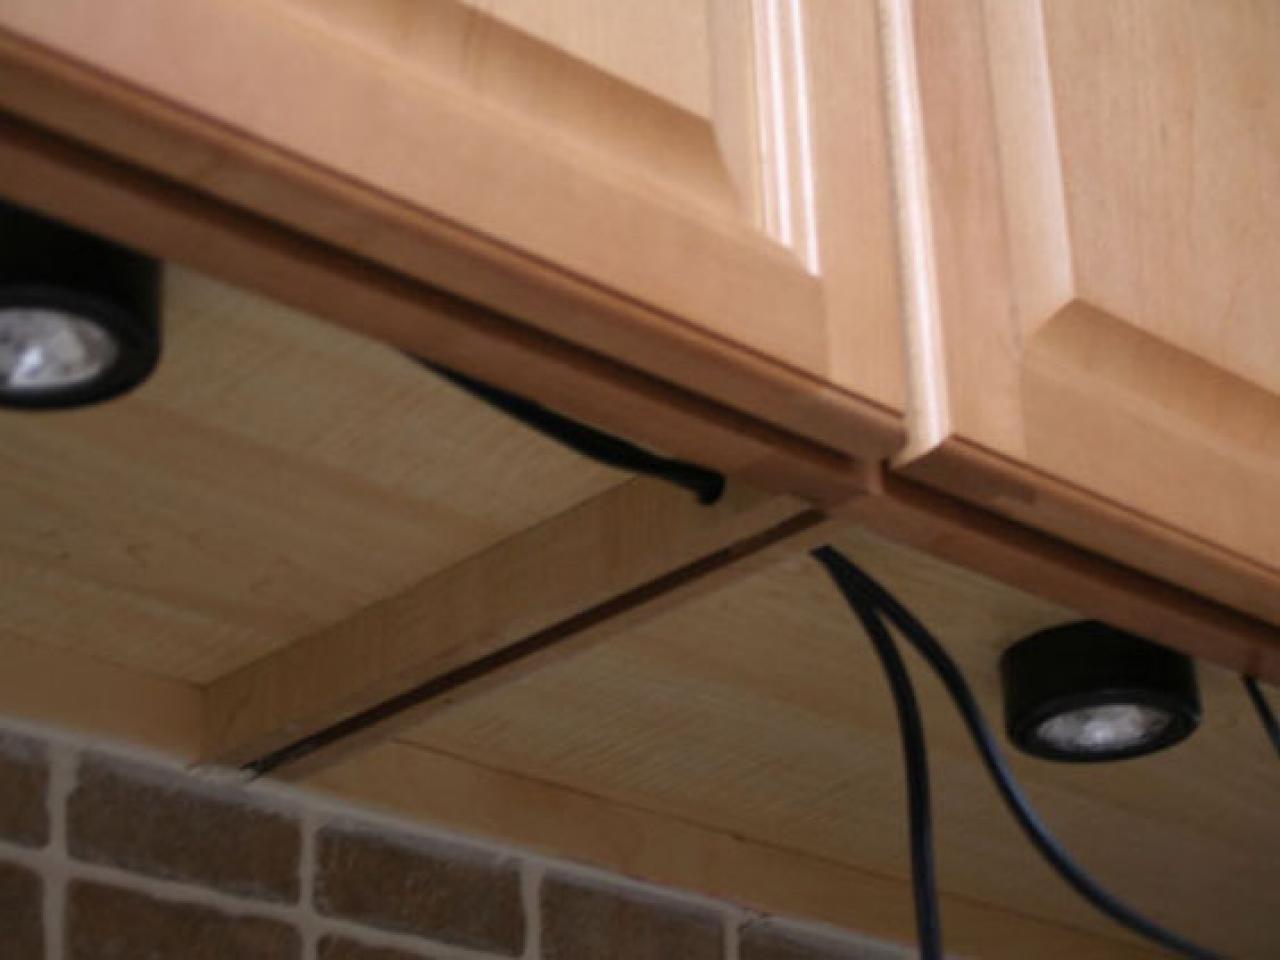 How do you install under-cabinet lighting?